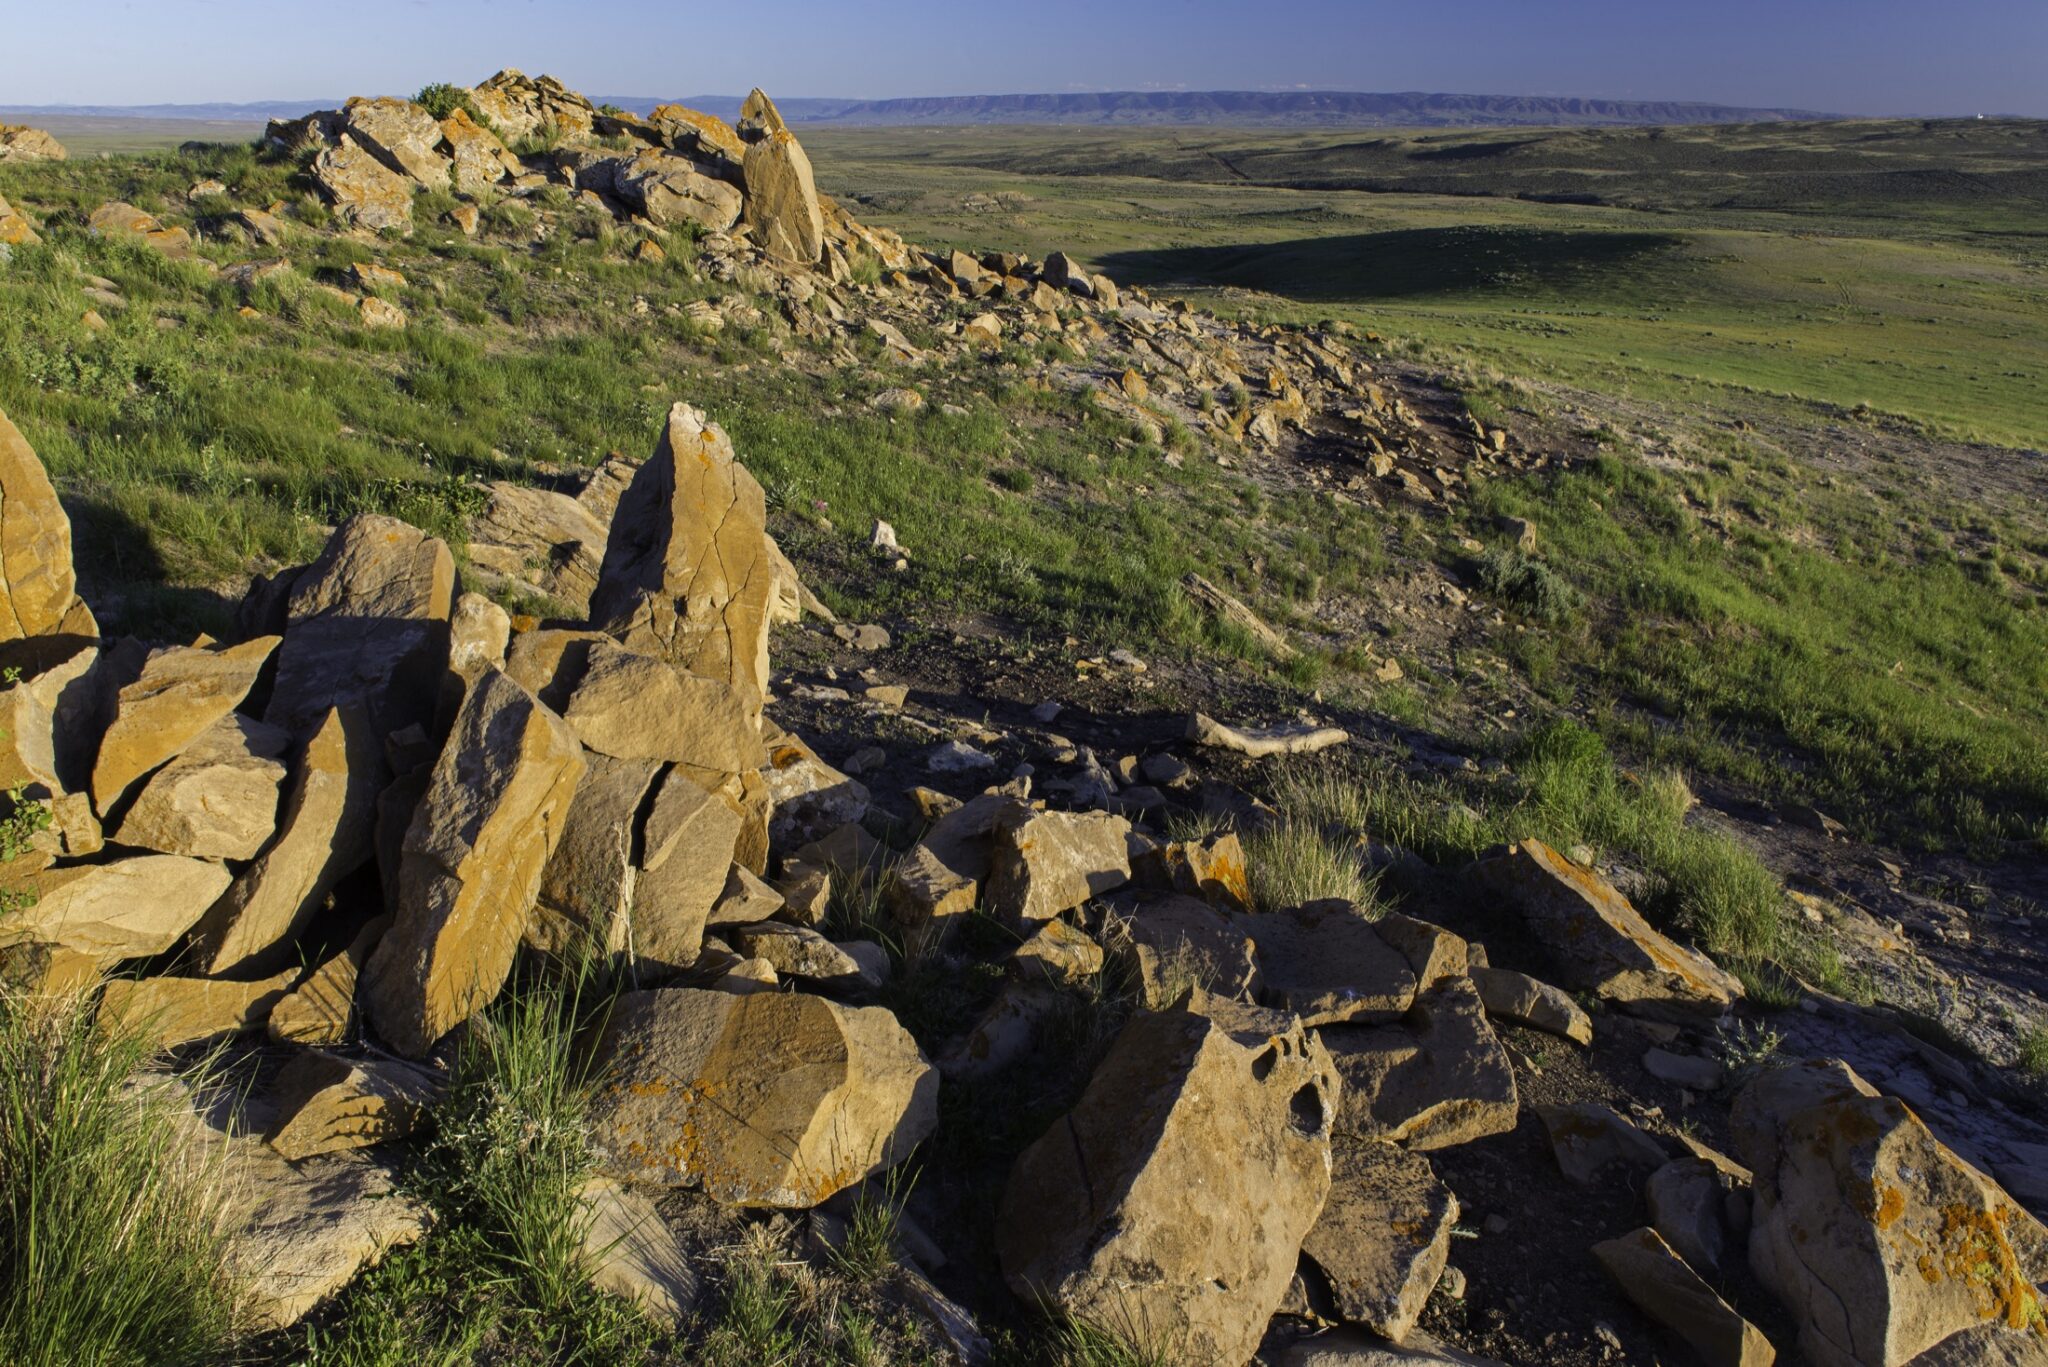 A rocky portion of land in Wyoming